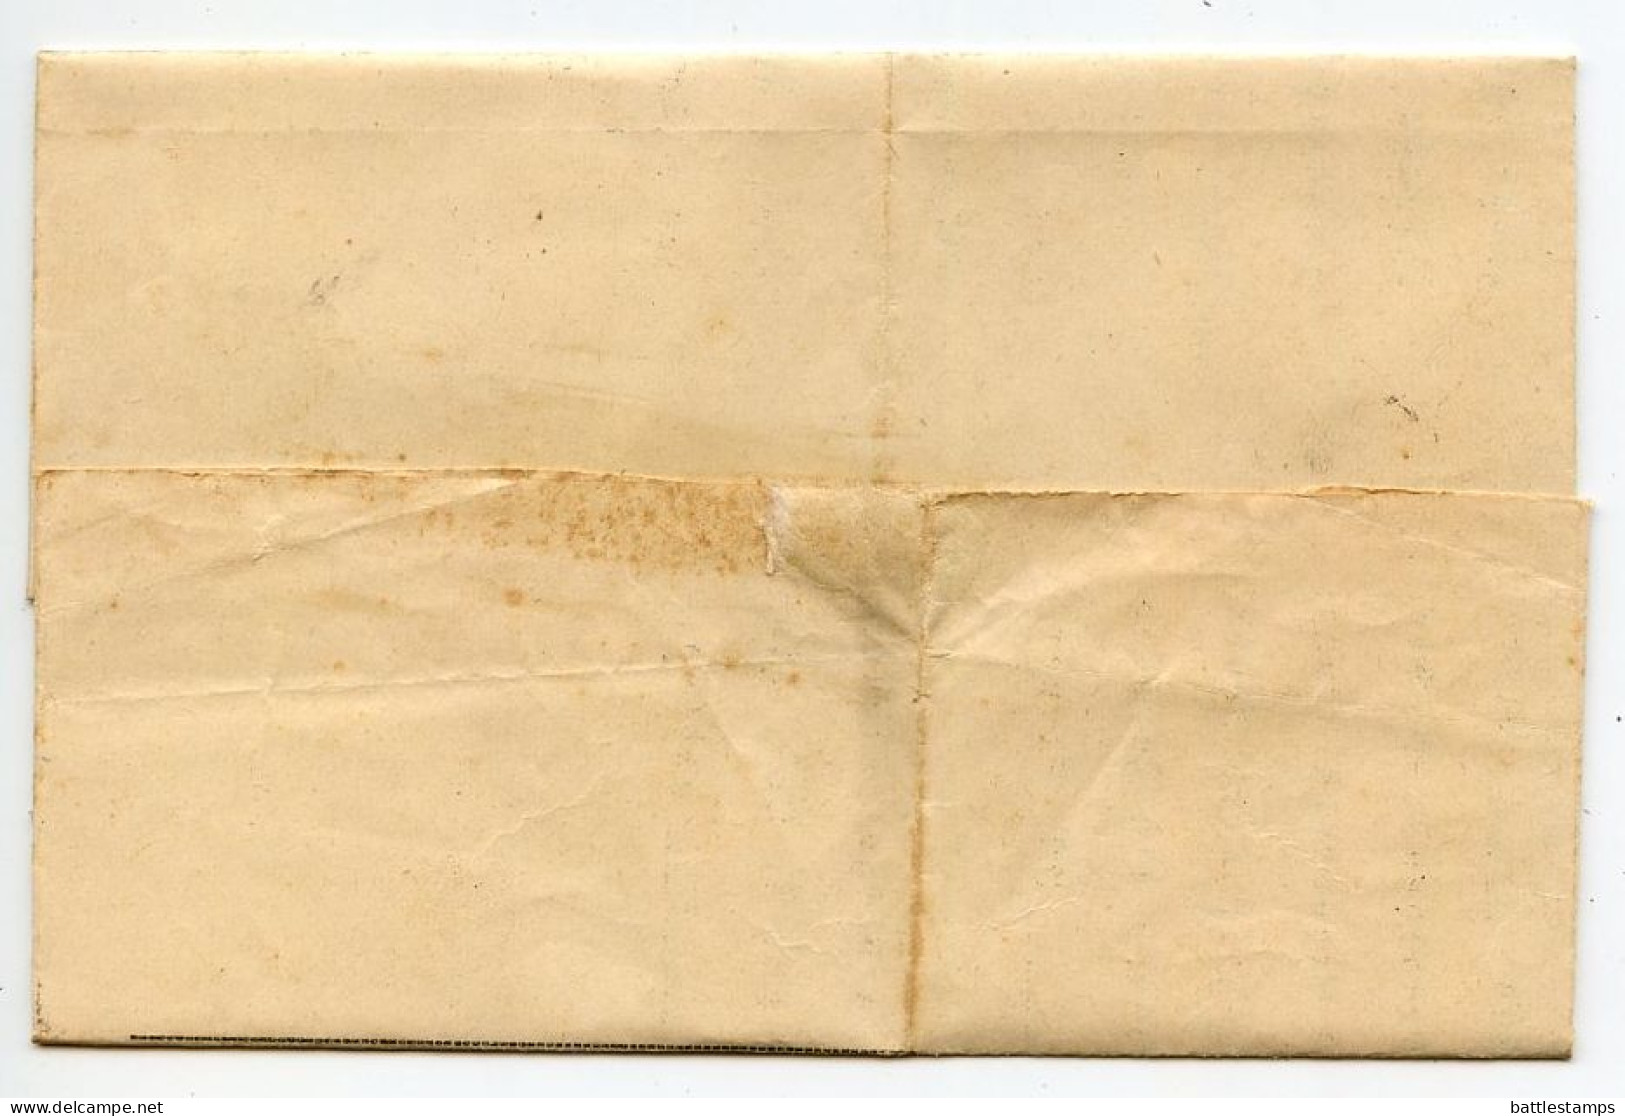 Germany 1930 Official Folded Document Cover; Melle - Finanzamt (Tax Office); Advance Tax Declaration - Covers & Documents